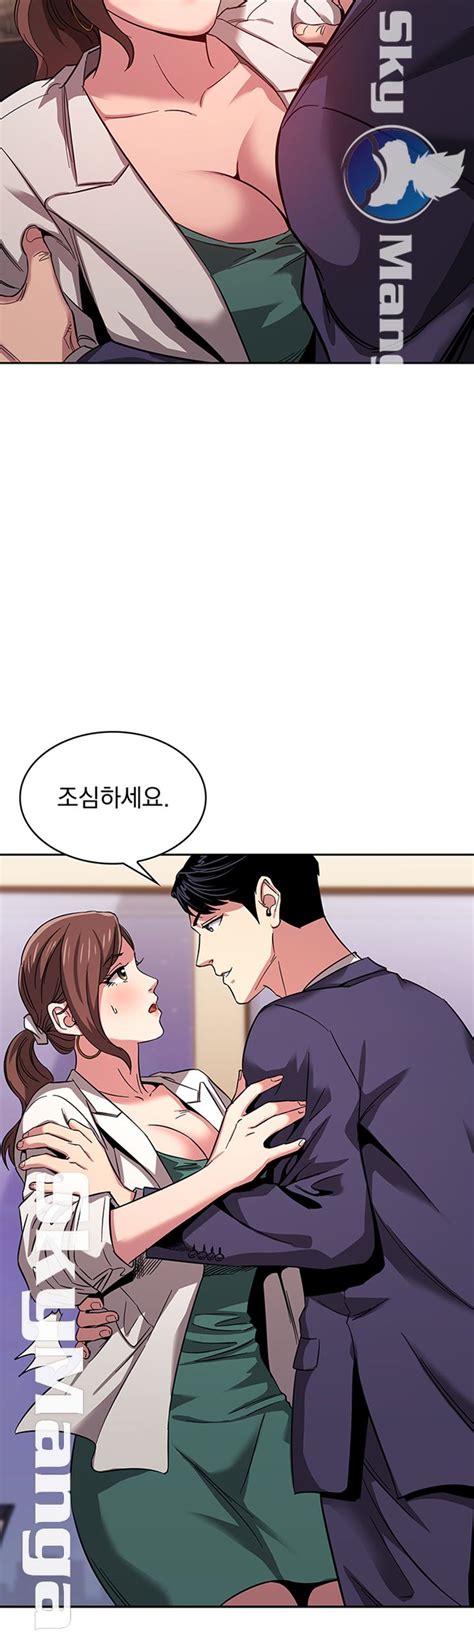 Sorry for the popup bothering readers. mother hunting raw - chap 11 - skymanga